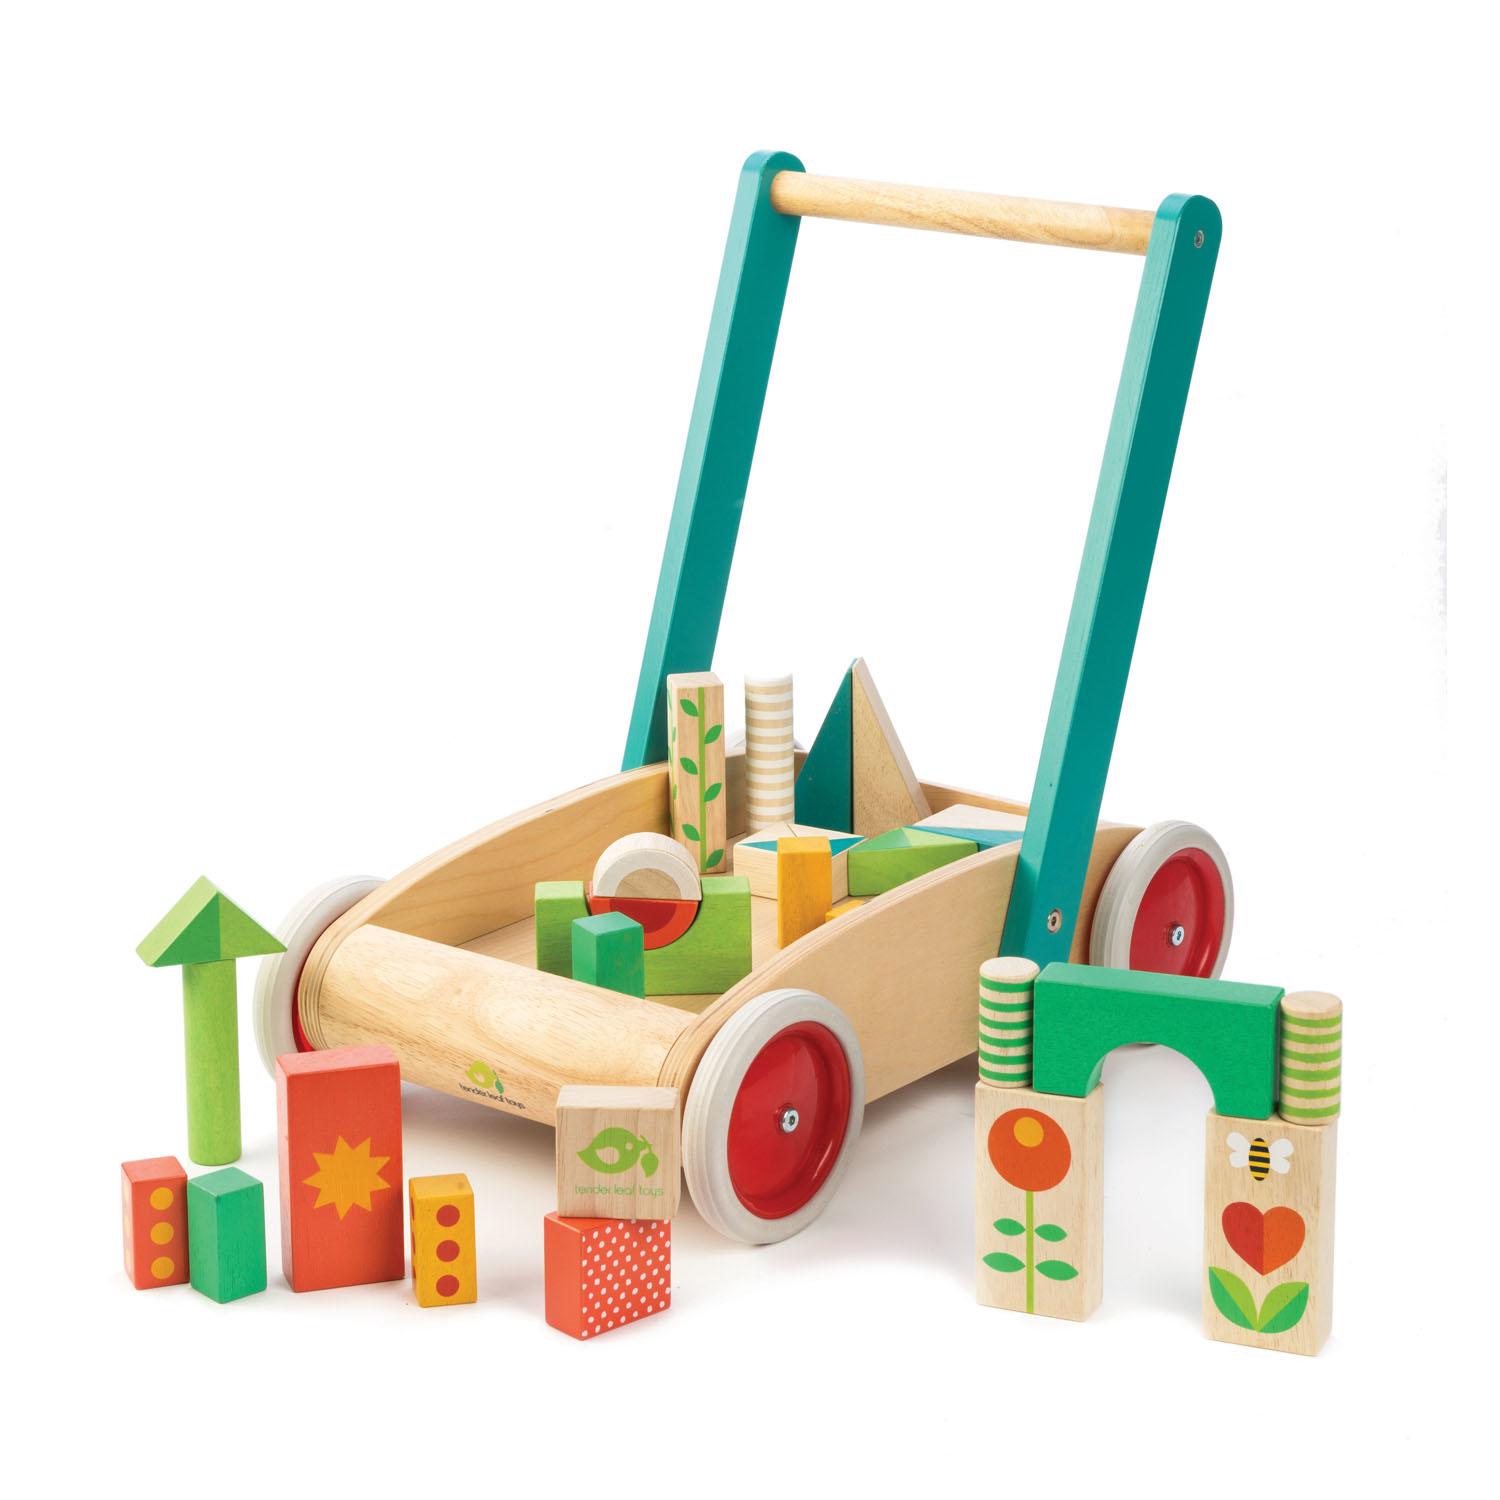 New Sturdy Wood Baby Walker FIlled with Blocks and Rubber Wheels #4